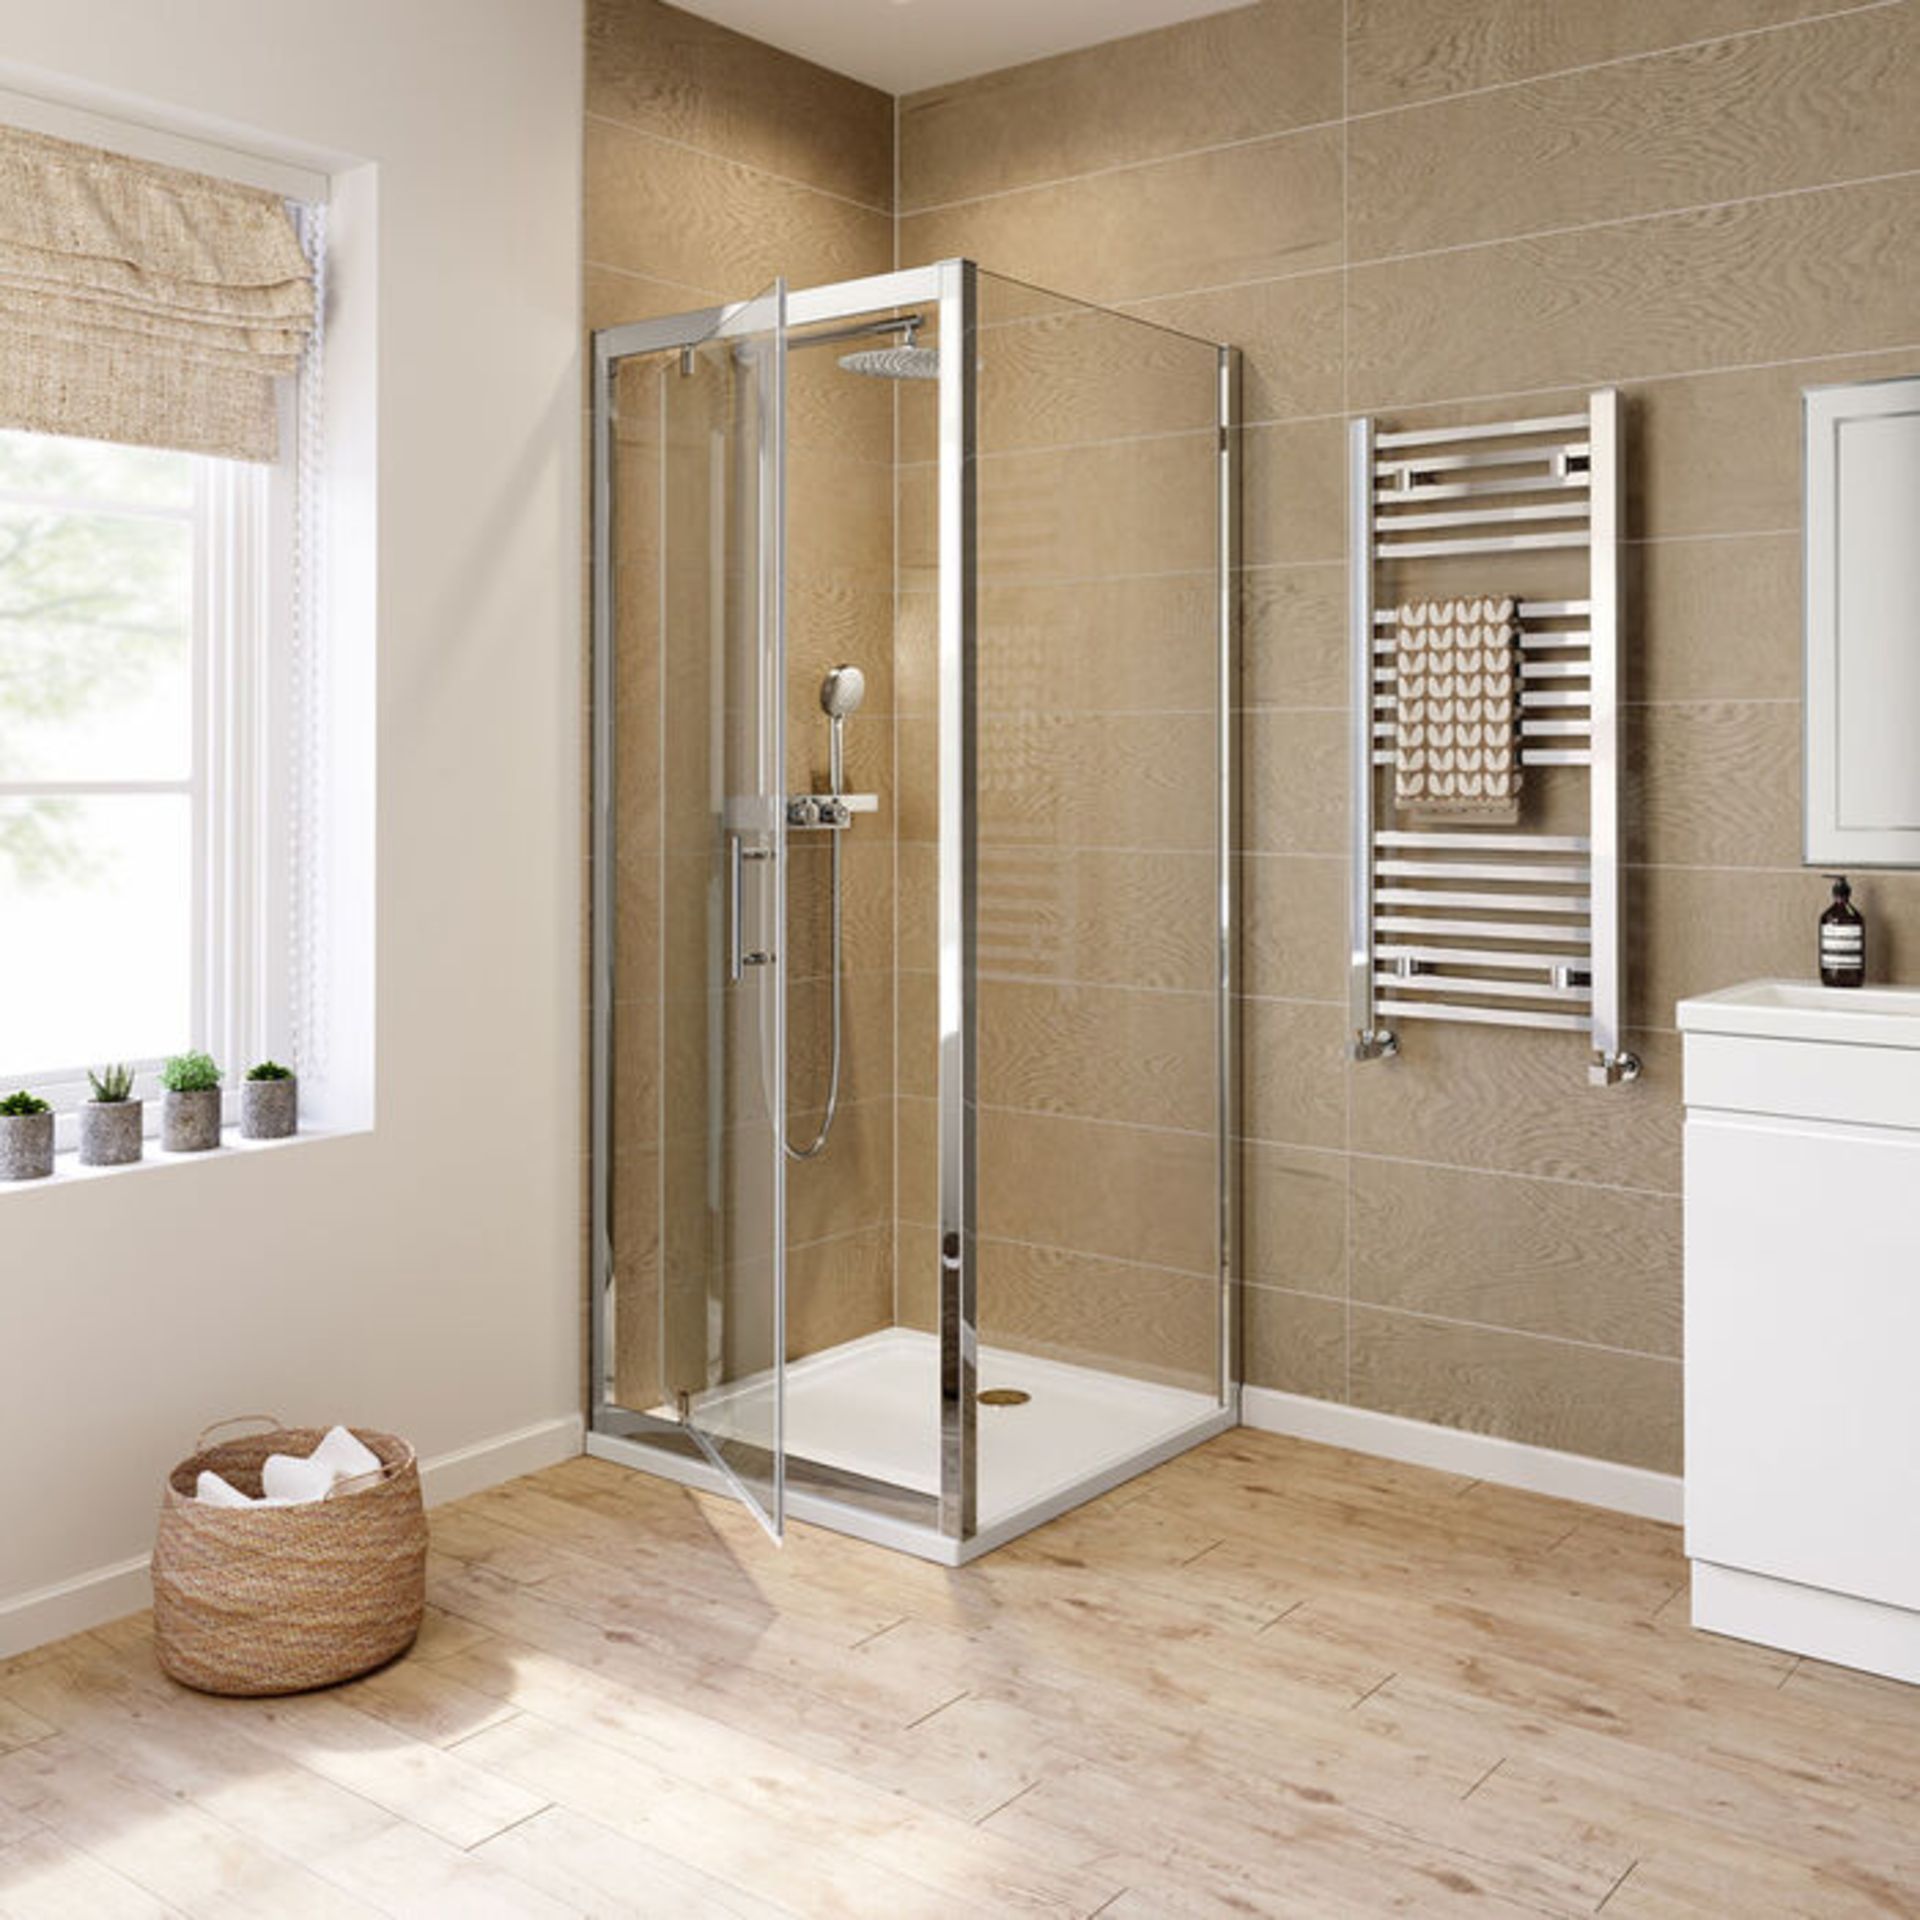 NEW 800x800mm - 6mm - Elements Pivot Door Shower Enclosure. RRP £330.99.6mm Safety Glass Full... - Image 3 of 3